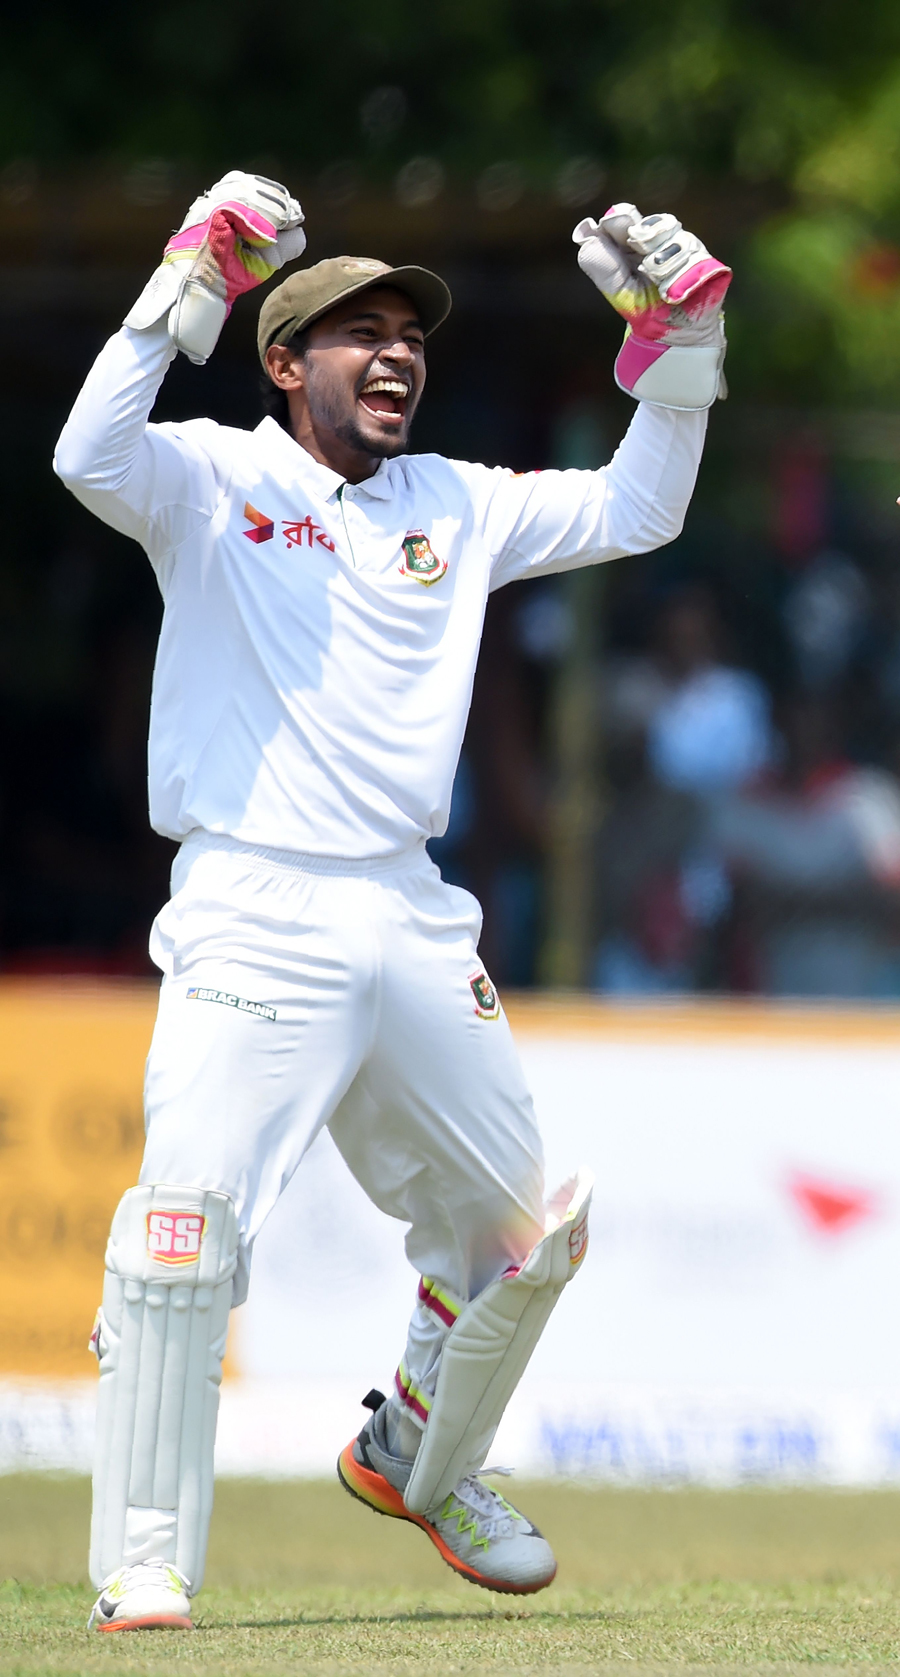 Mushfiqur Rahim rejoices after taking a catch on day four of their second Test cricket match against Sri Lanka in Colombo, Sri Lanka on Saturday .